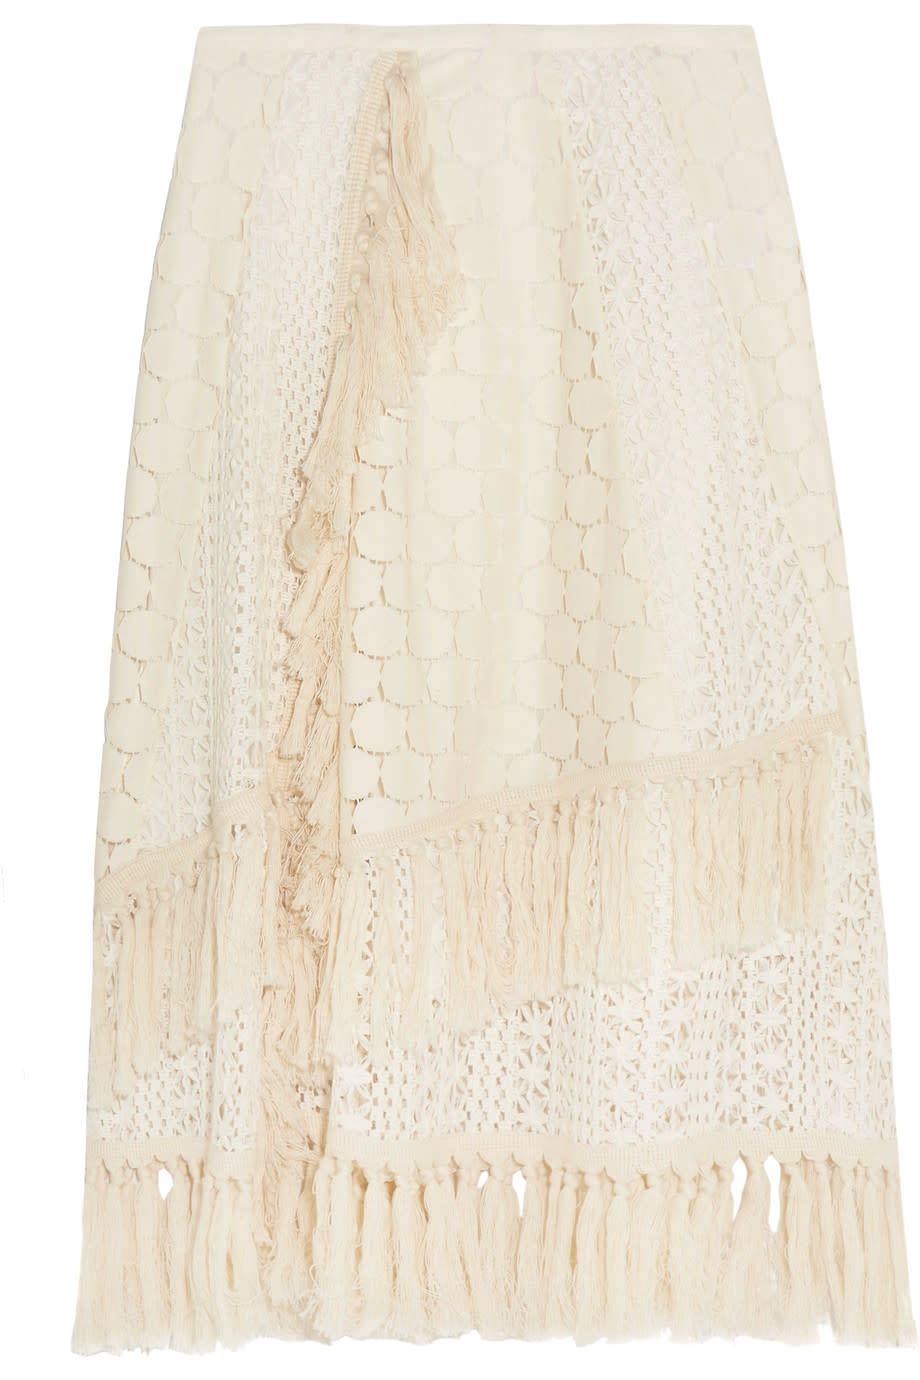 SEE BY CHLOÉ Tasseled crocheted lace skirt